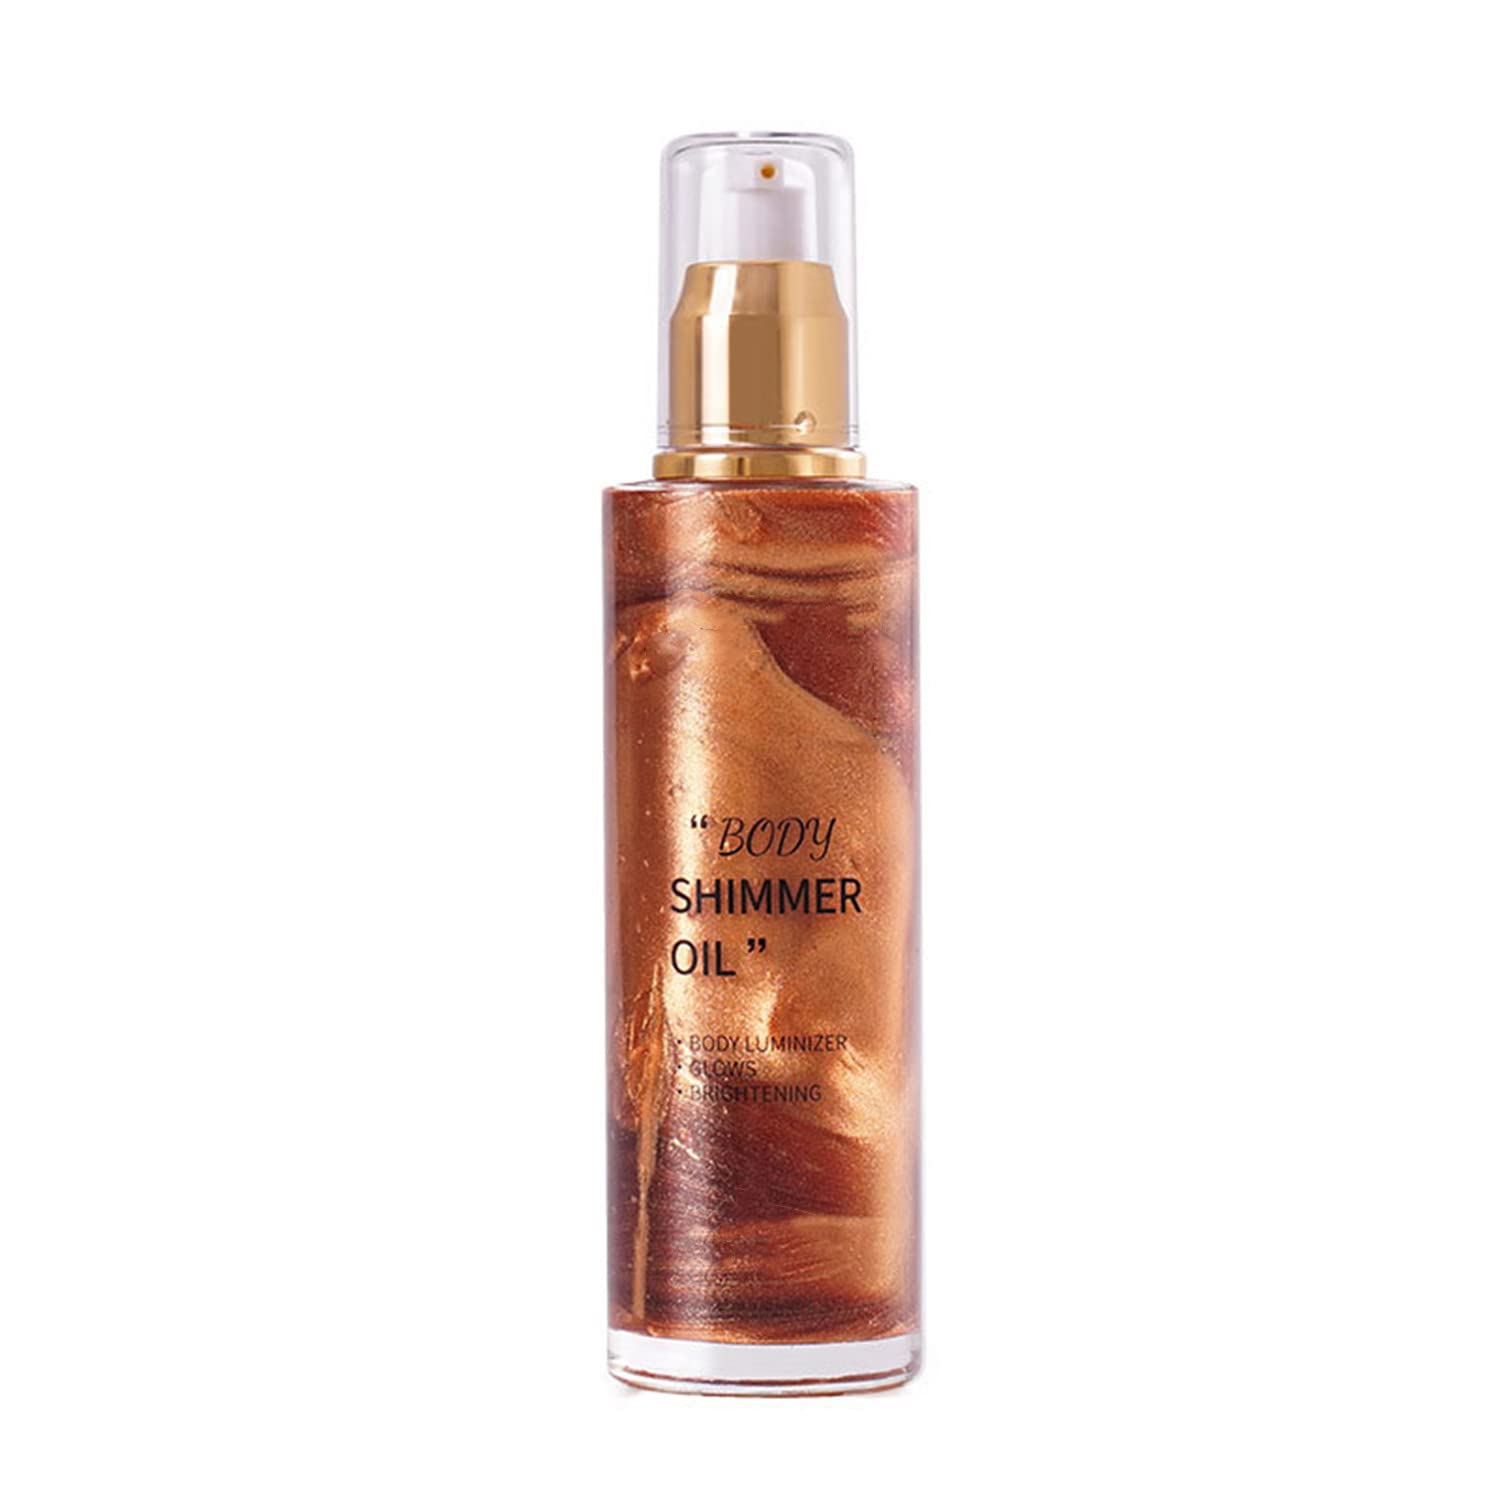 N°5 The Gold Body Oil